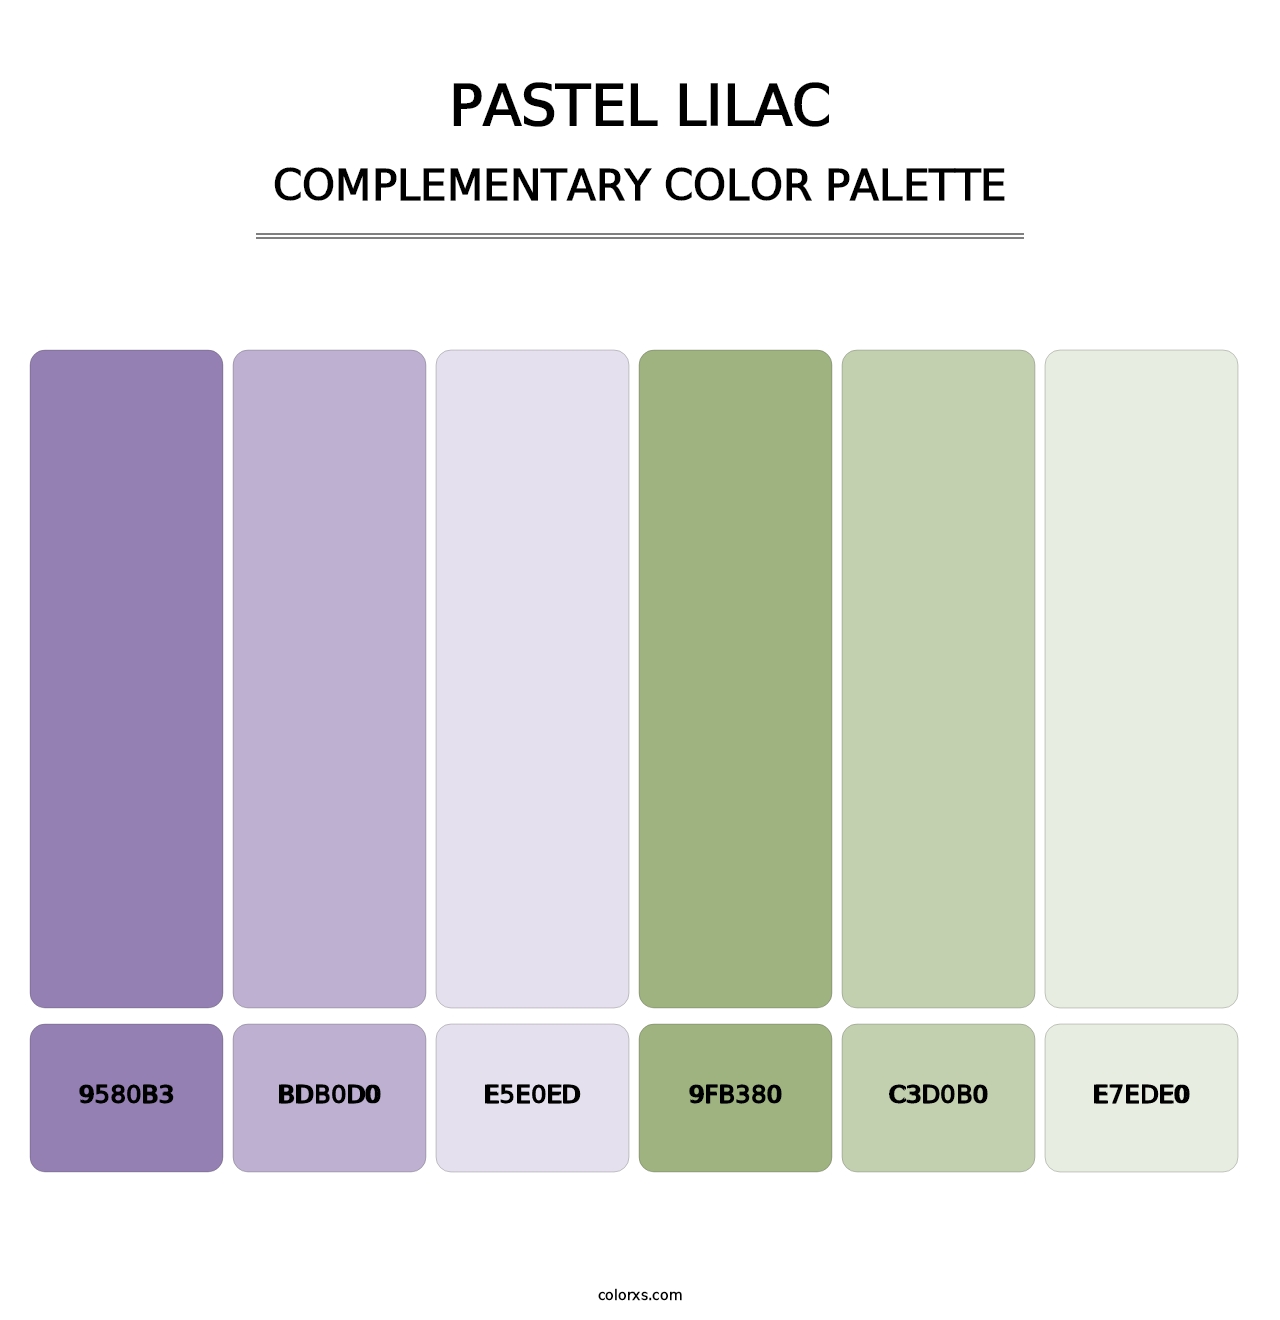 Pastel Lilac - Complementary Color Palette